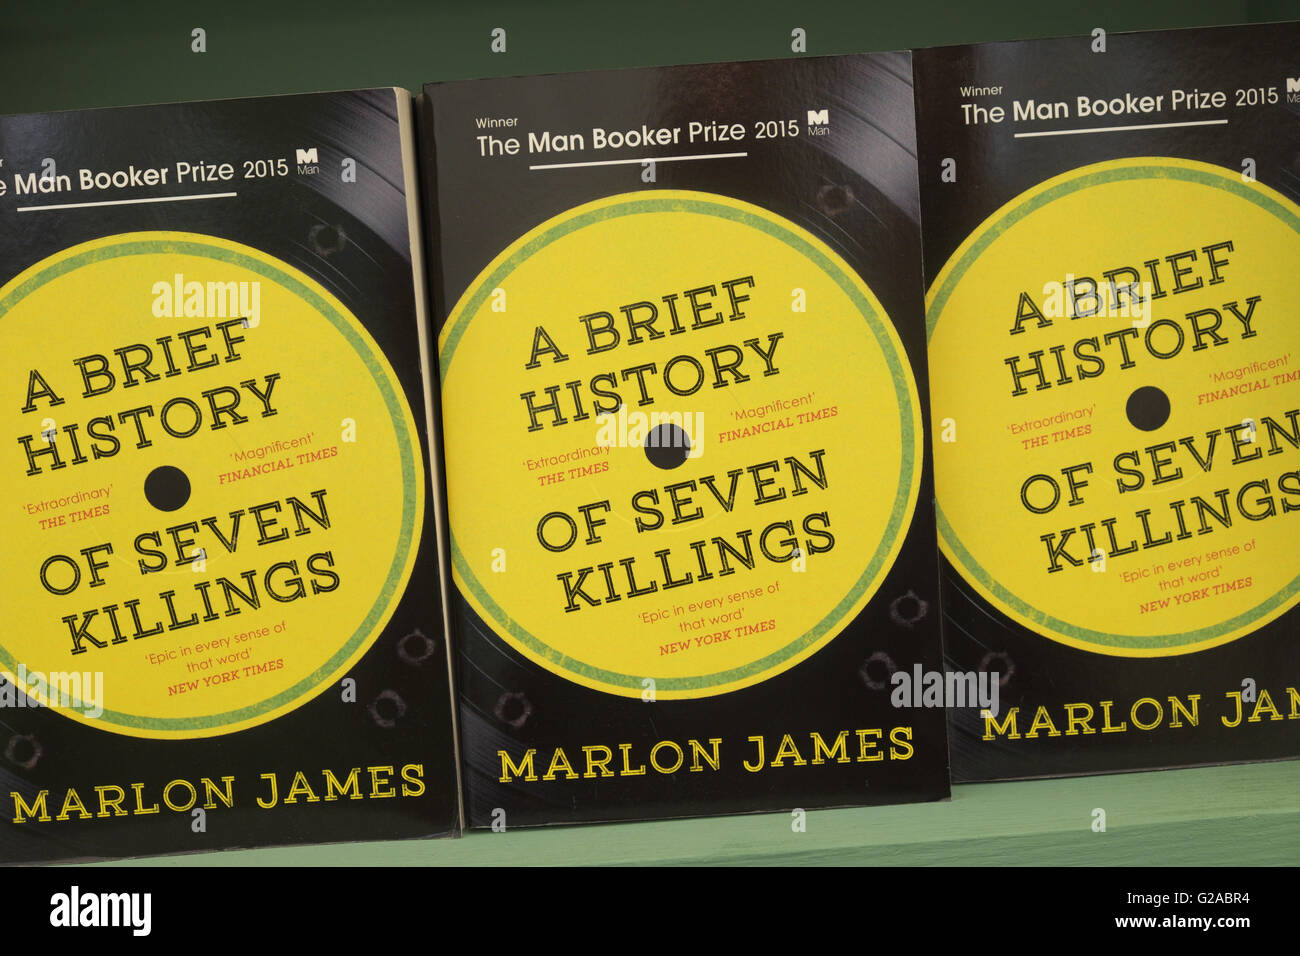 Marlon James the Man Booker Prize winner for 2015 with his book A Brief History of Seven Killings Stock Photo